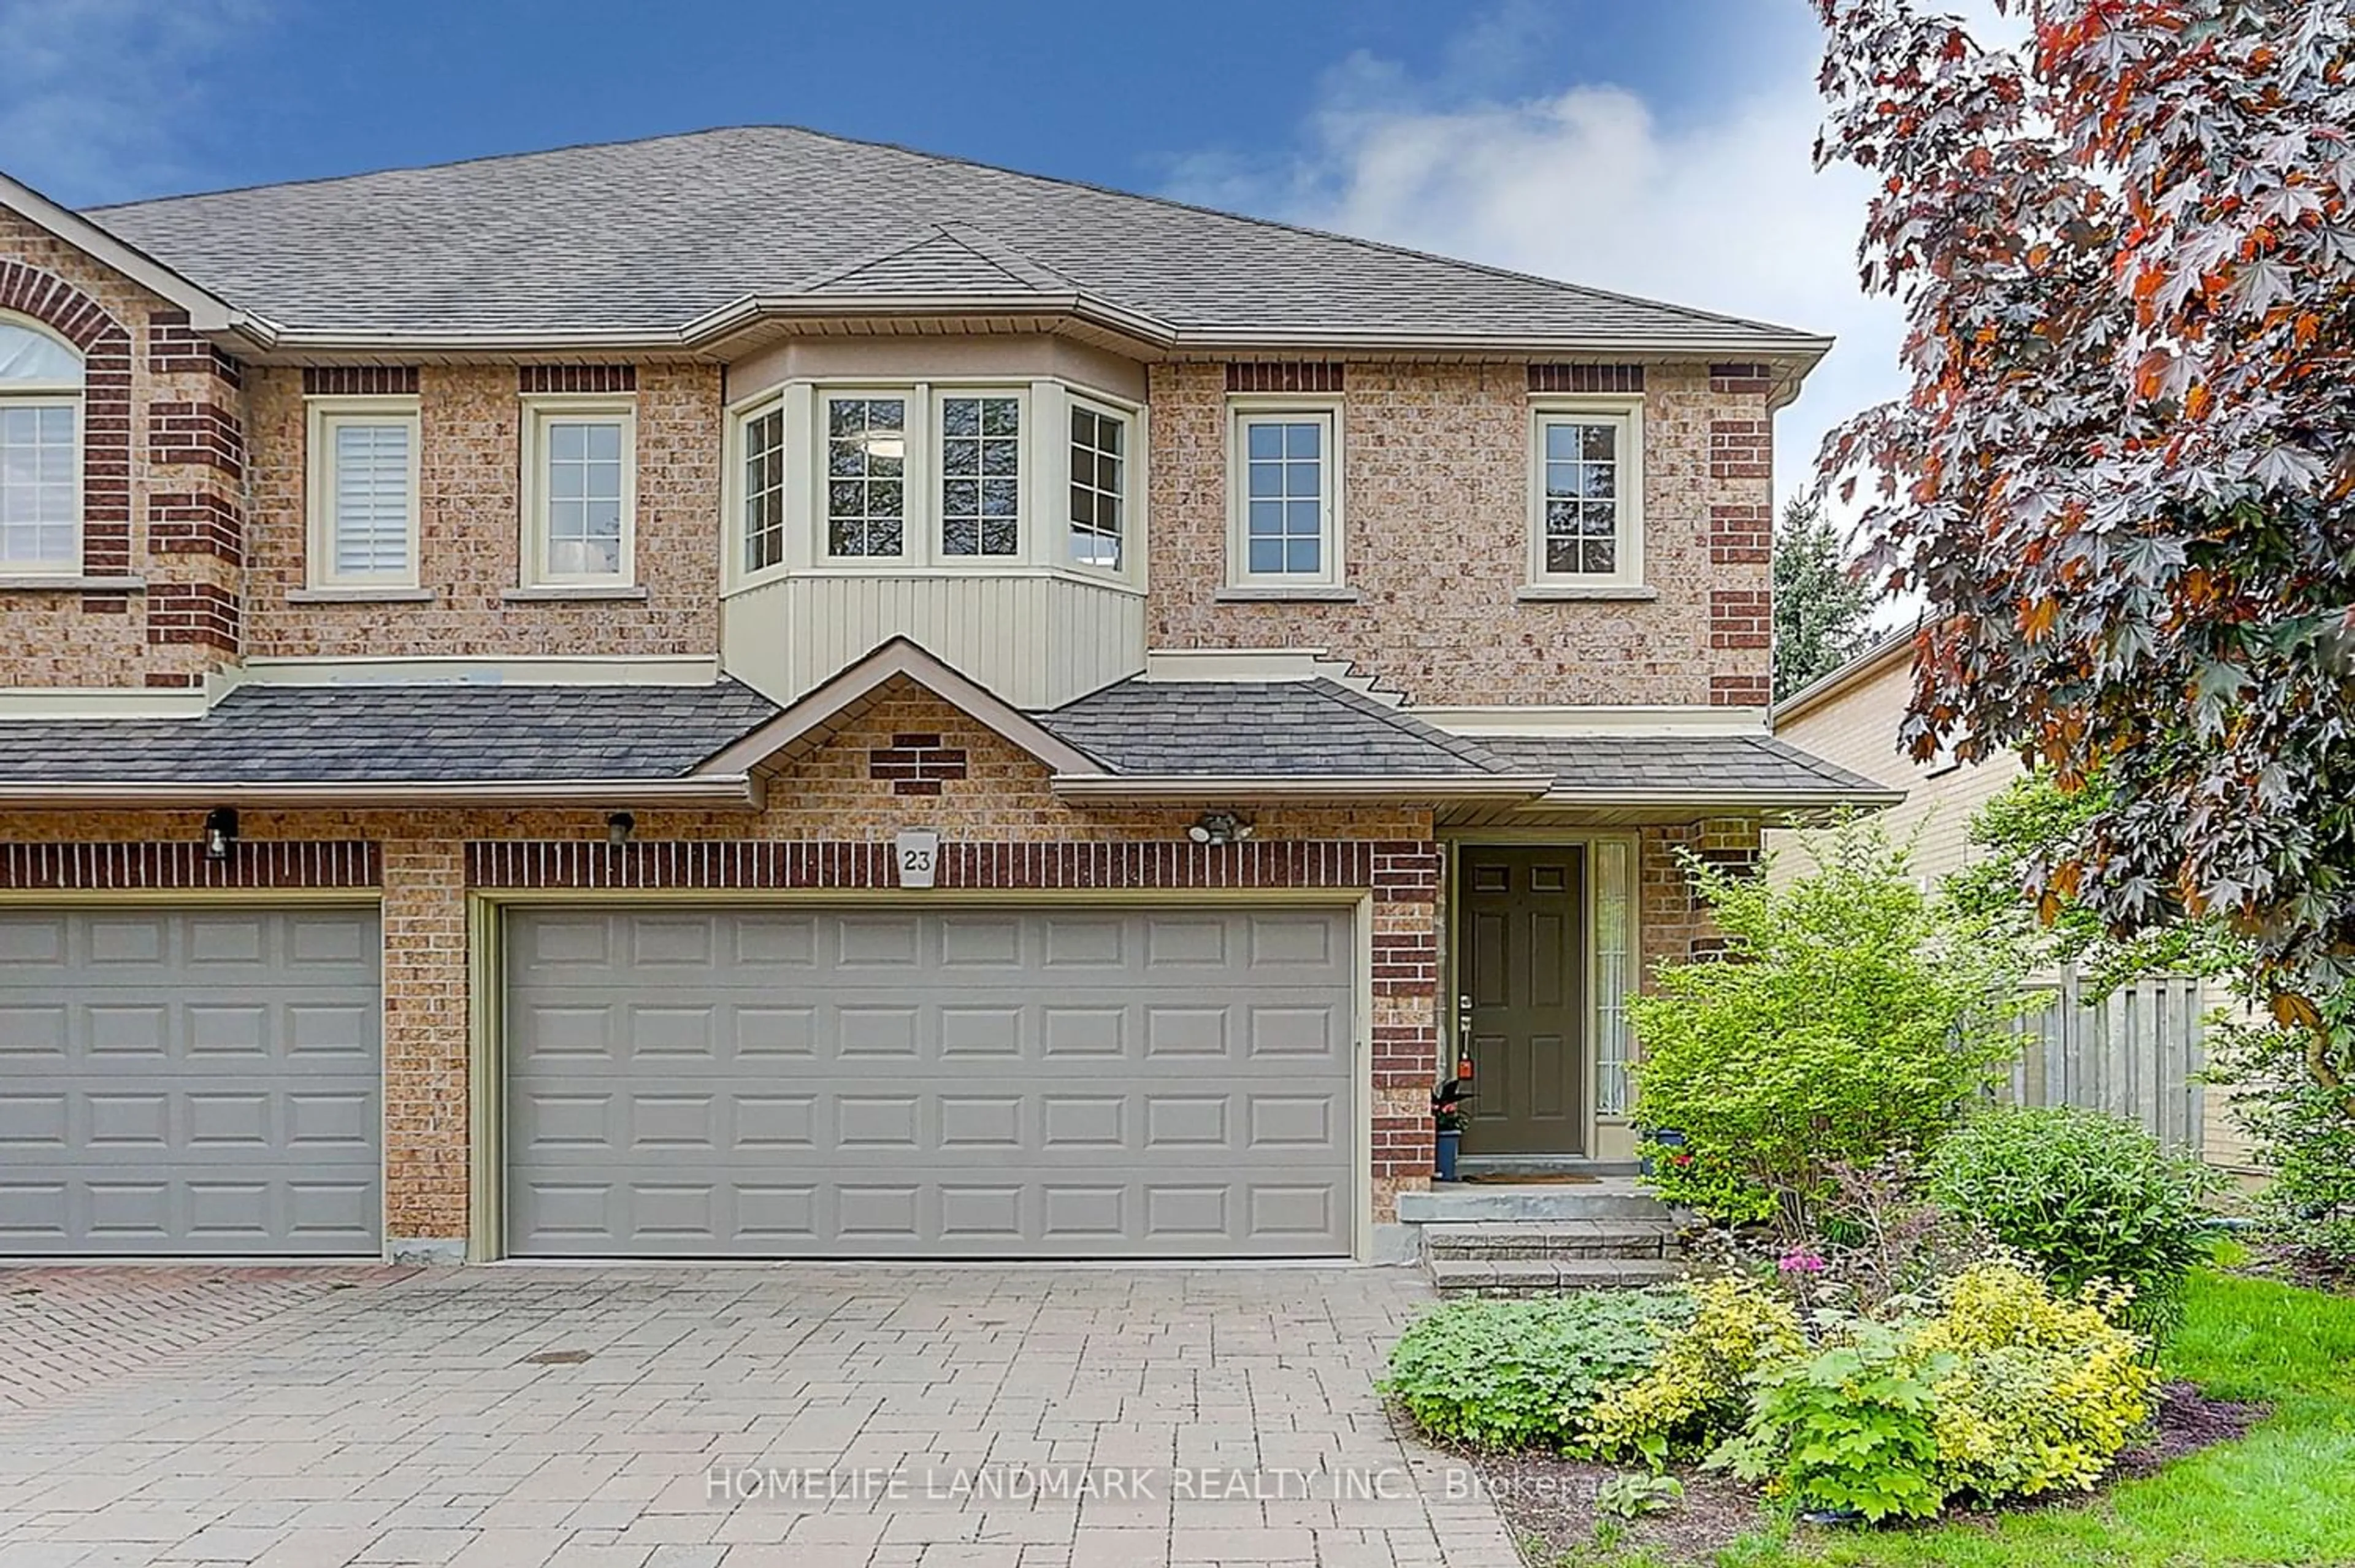 Home with brick exterior material for 50 Rubin St #23, Richmond Hill Ontario L4B 3L5